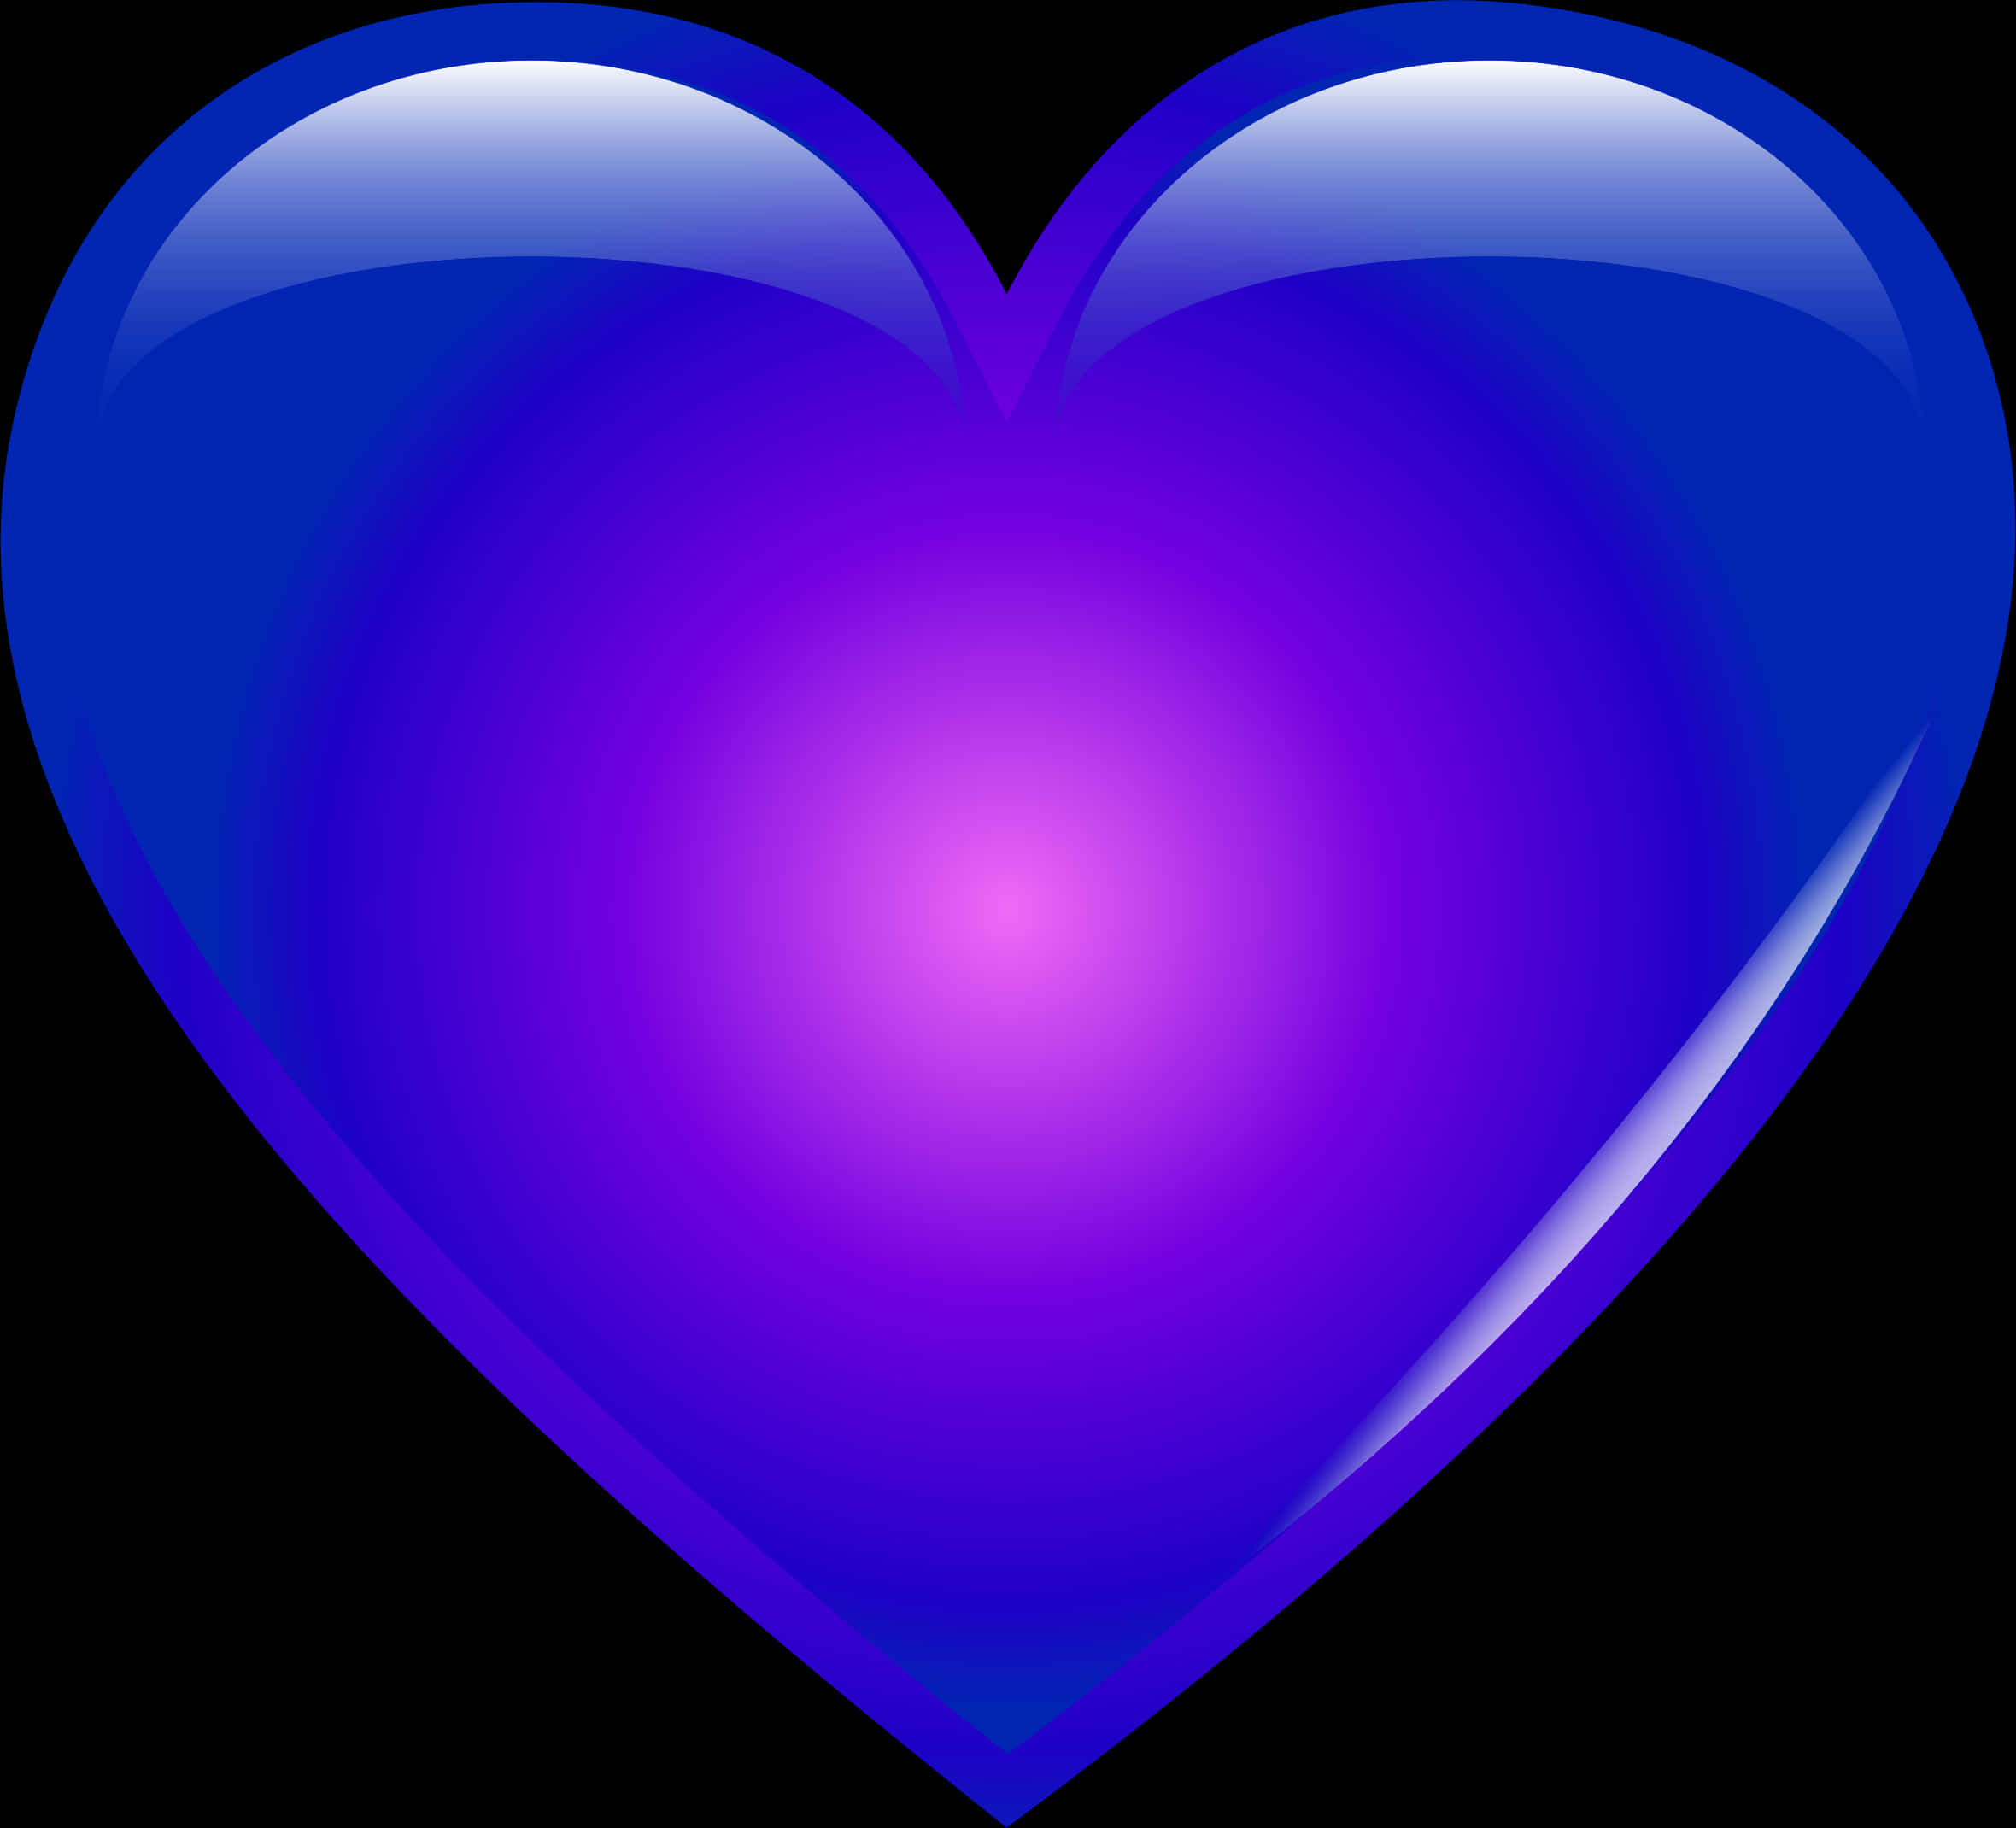 A Blue Heart With A Black Background